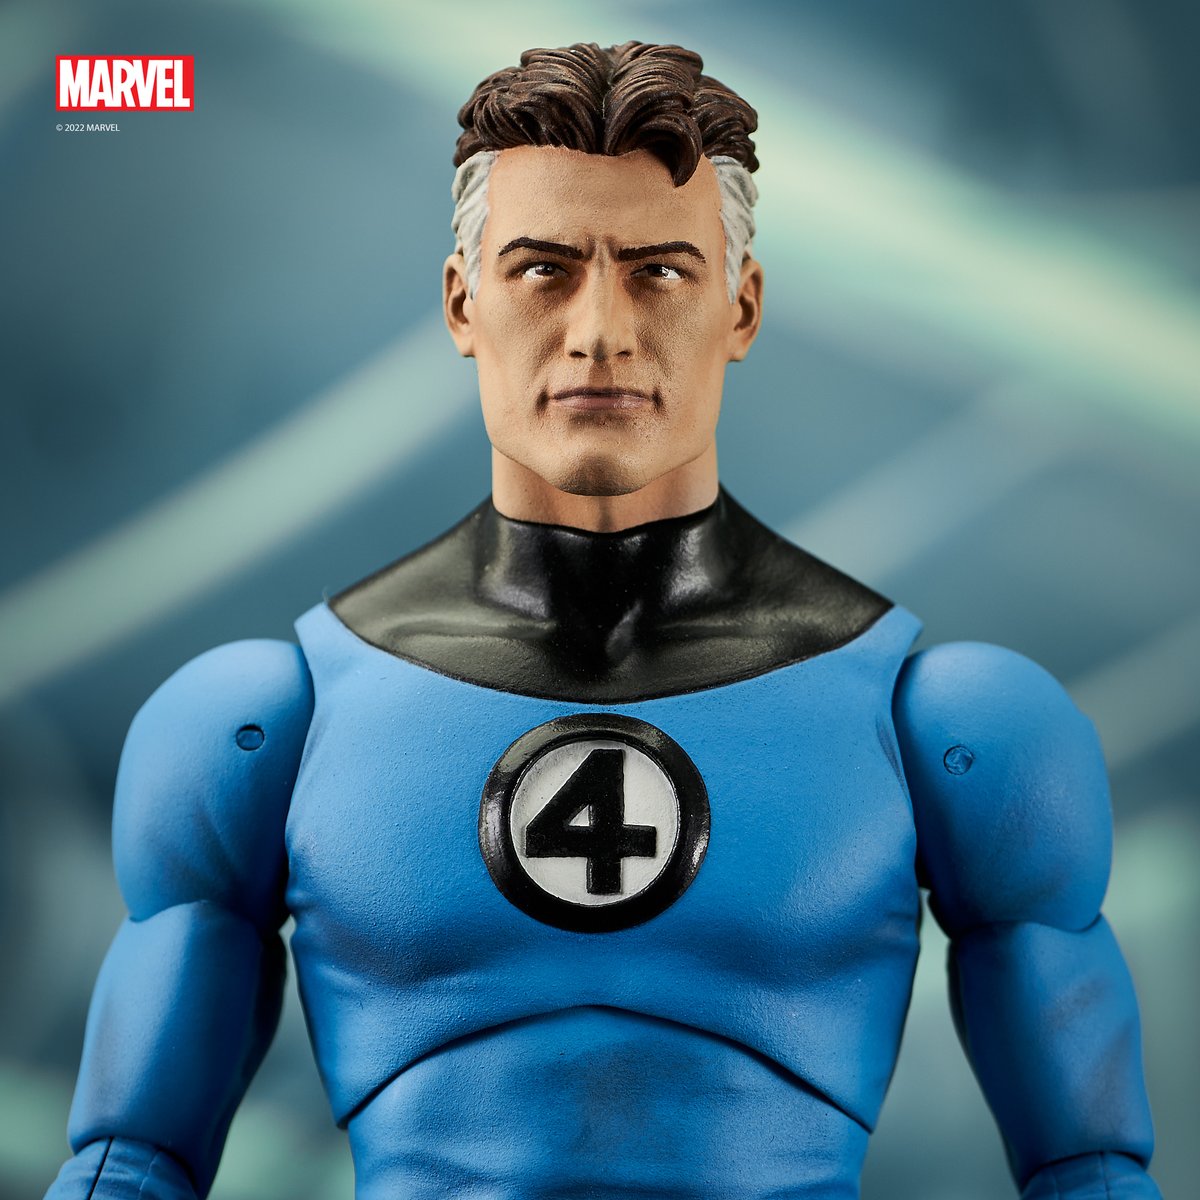 In Stock soon: #Iceman Select #ActionFigure, #MrFantastic Select Action Figure, and the #Drax Animated-Style Statue! See what is coming Q3 2023: bit.ly/44HxBDJ 

 #MarvelComics #XMen #FantasticFour #newtoyday #newinstock